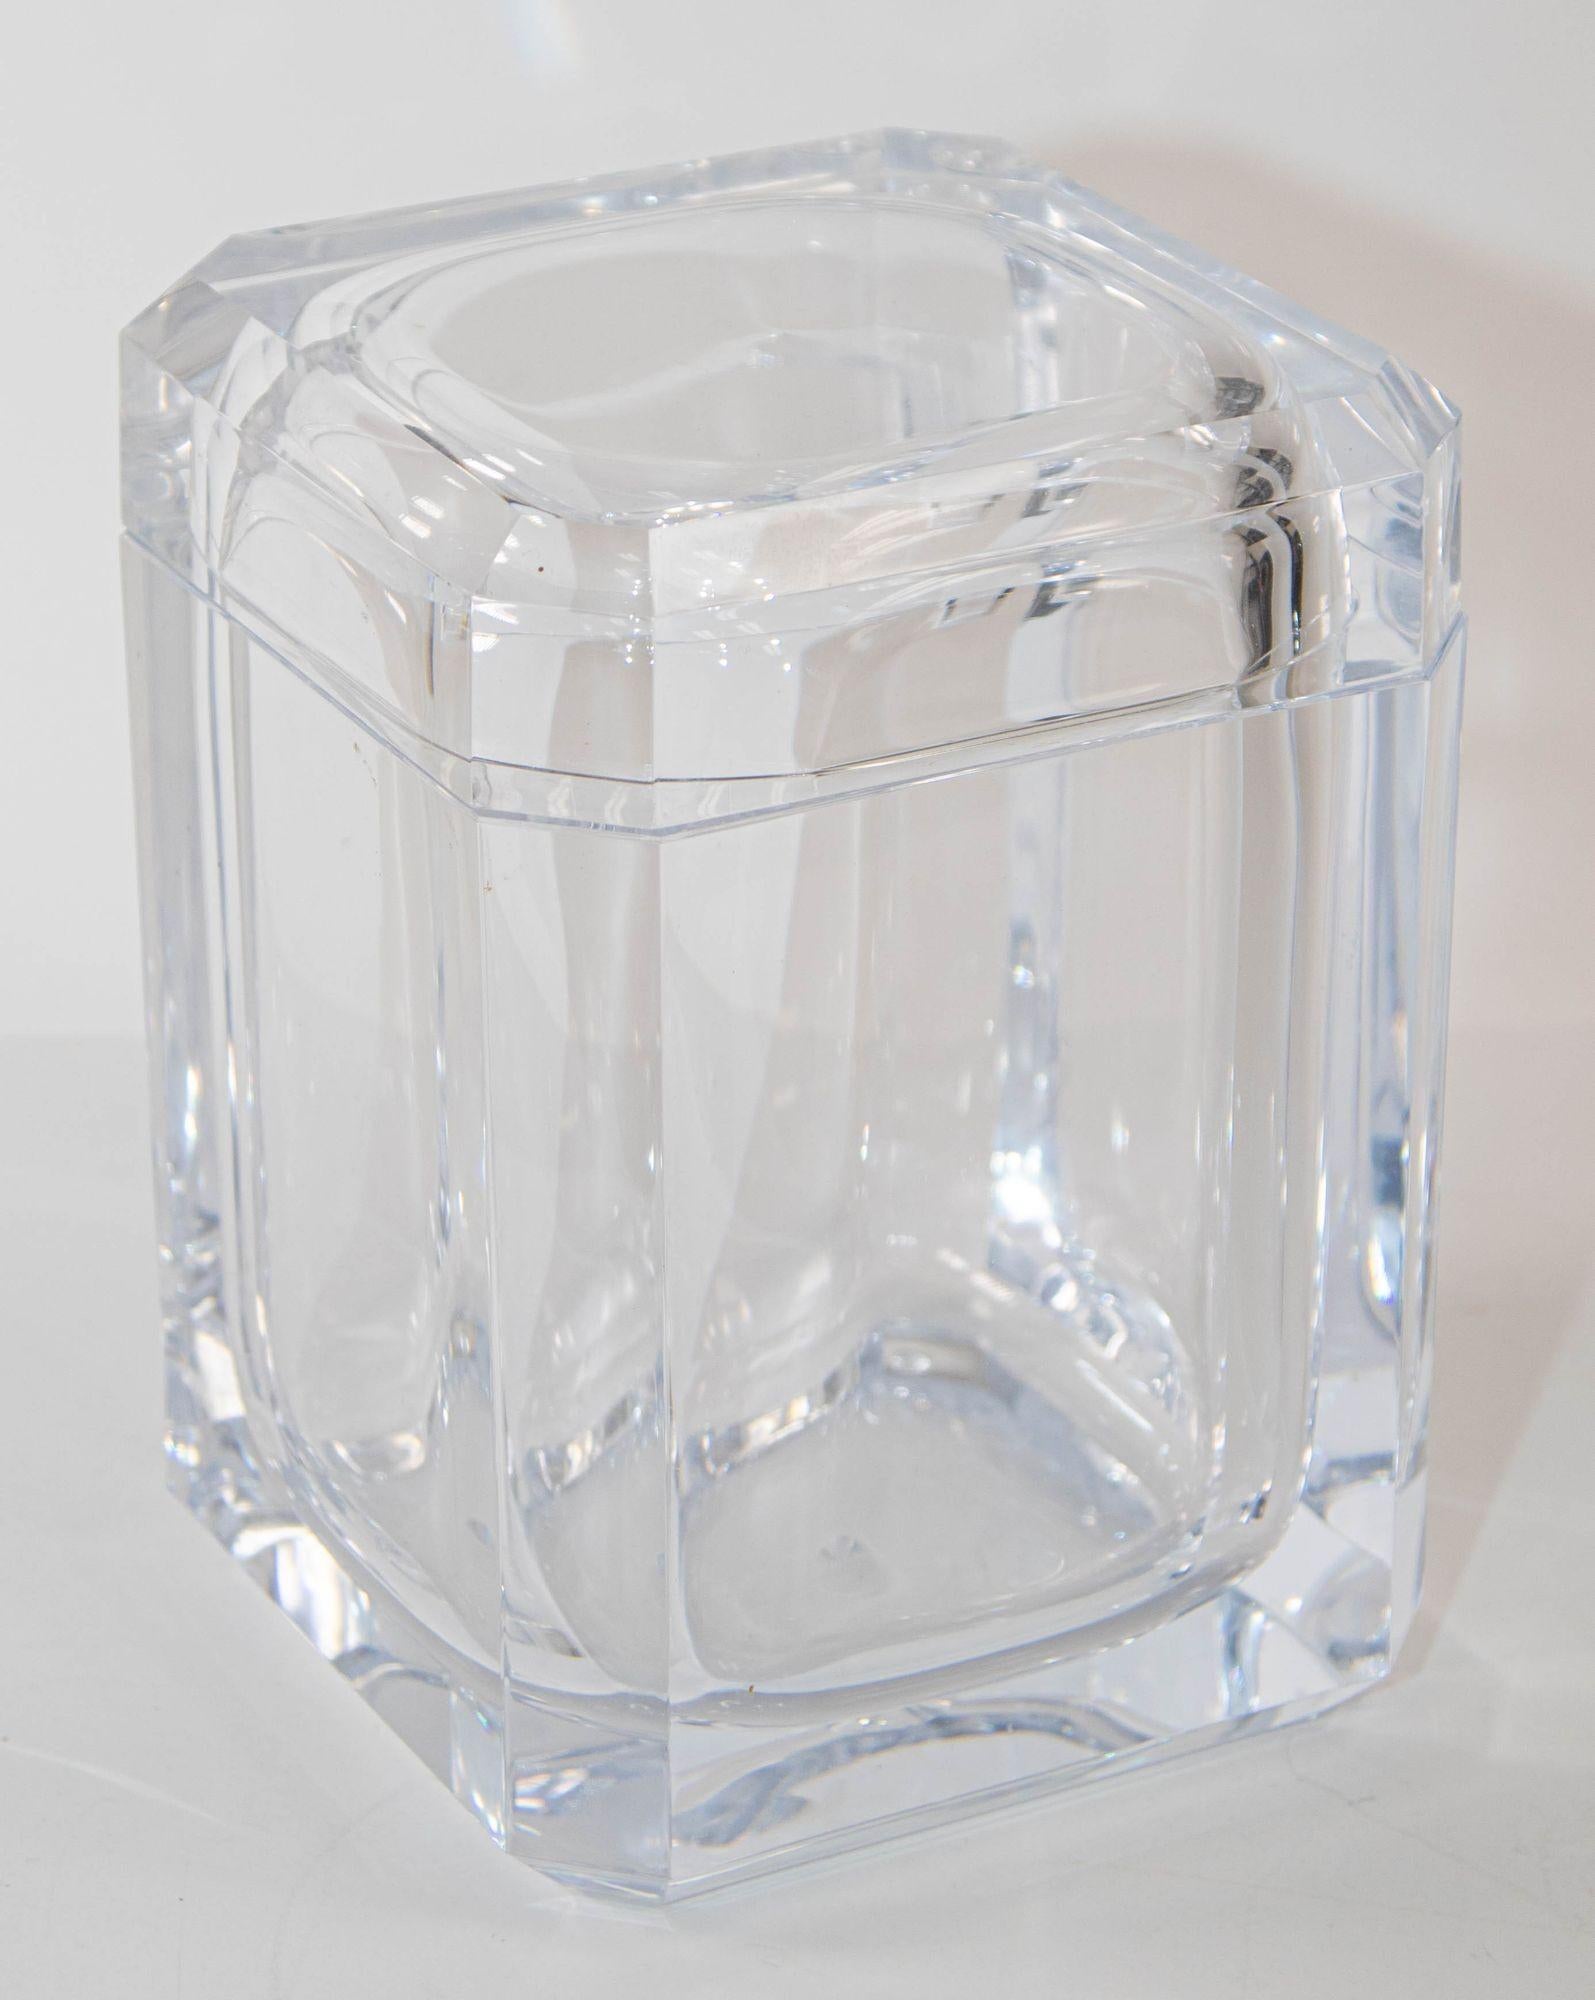 
Vintage Mid-Century Modern Alessandro Albrizzi Style Lucite Square Faceted Ice Bucket, USA CIRCA 1970-1980.
Mid-Century Modern finely detailed ice bucket in Lucite.
It looks like an over size diamond and the facets reflect light, adding to its